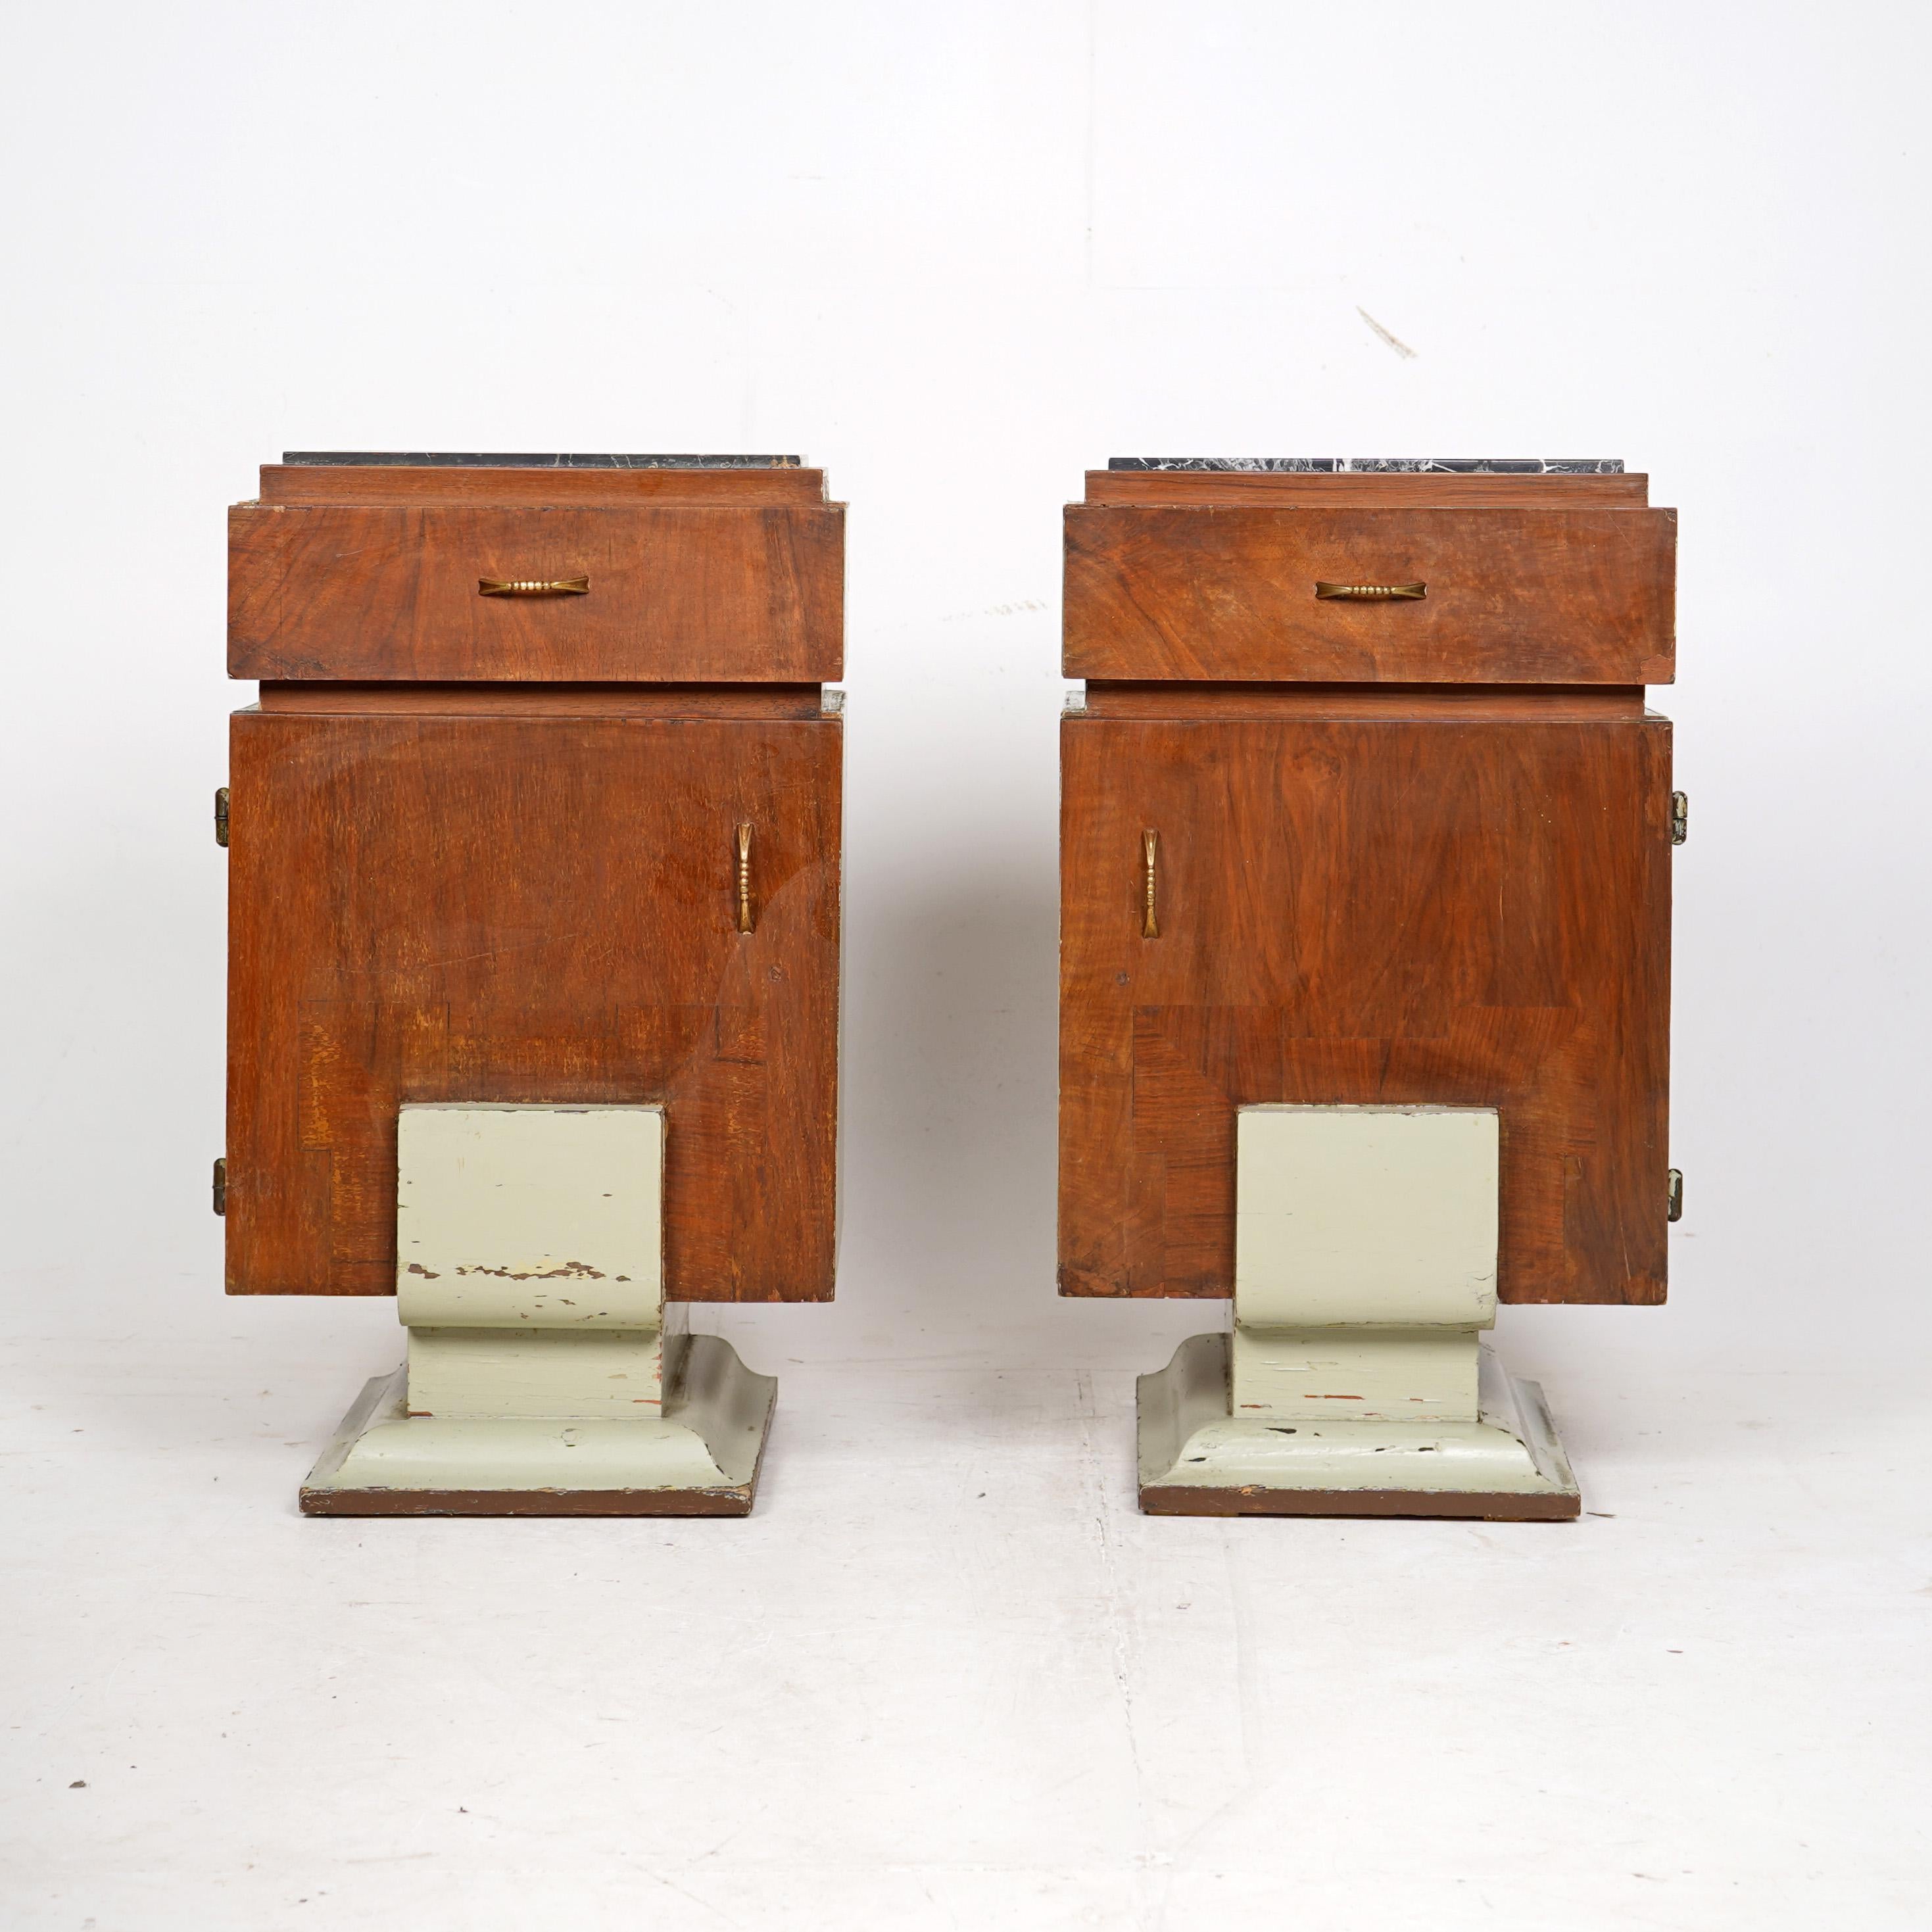 Pair Art Deco Bedside Tables. 1930s Italian bedside tables with marble tops. Walnut veneer front, sides and base in the past have been painted green which has worn nicely. Original brass handles on the door and drawer.

Condition 
Please do take a